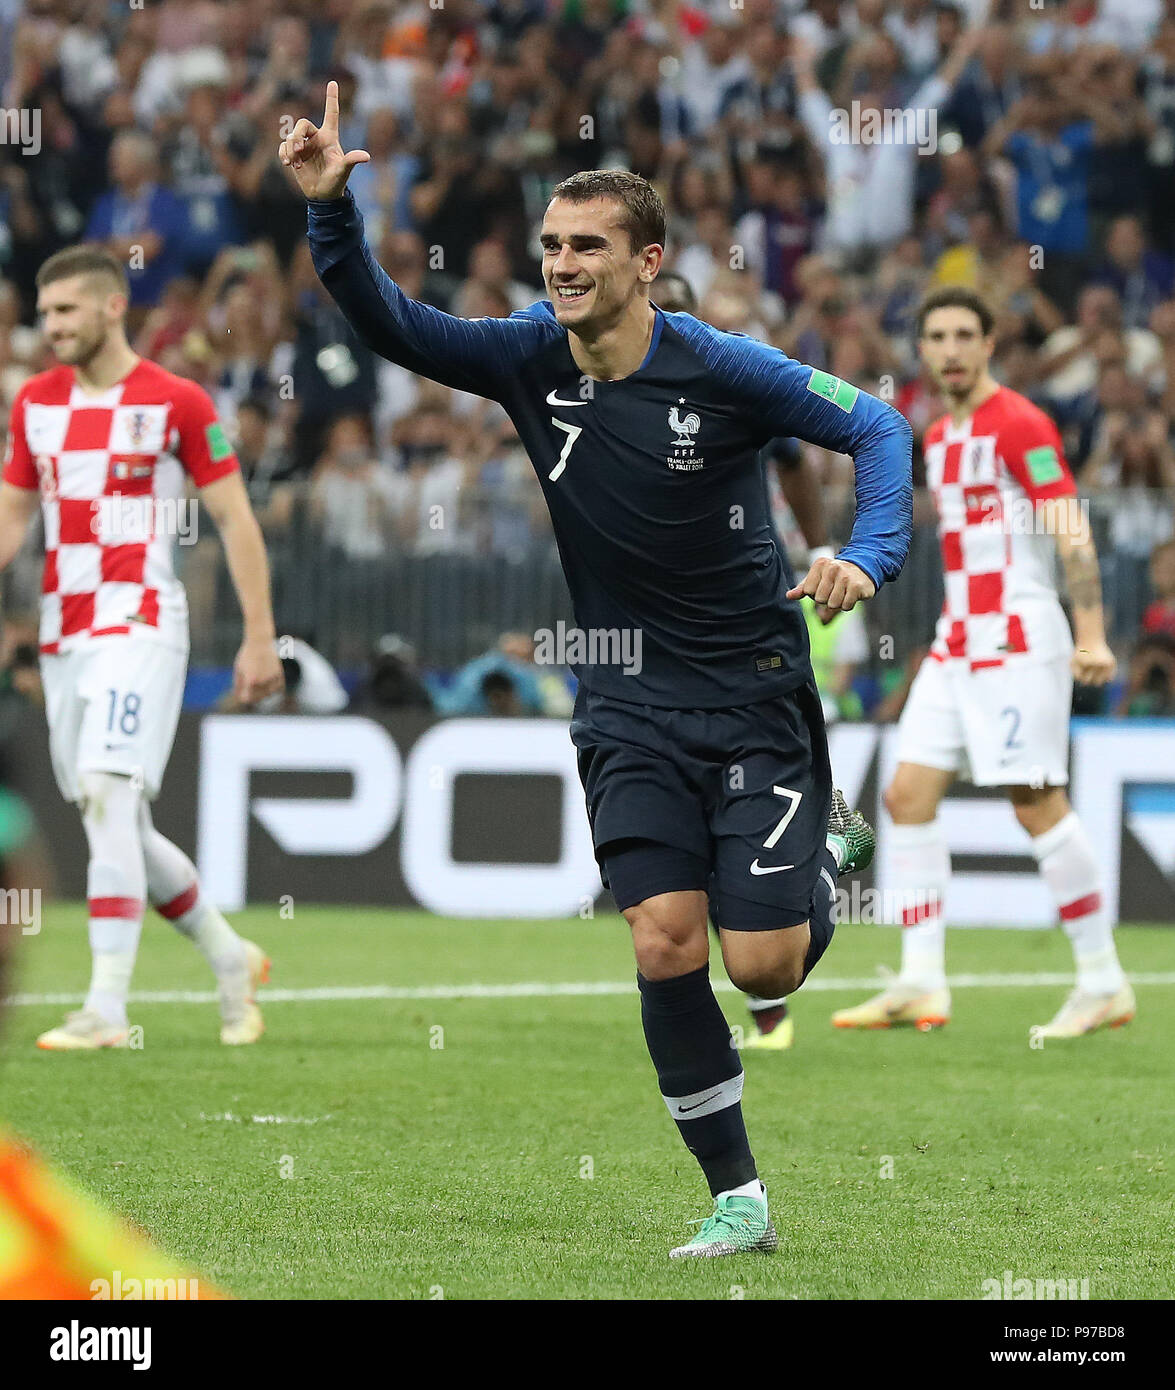 (180715) -- MOSCOW, July 15, 2018 (Xinhua) -- Antoine Griezmann of France celebrates scoring during the 2018 FIFA World Cup final match between France and Croatia in Moscow, Russia, July 15, 2018. (Xinhua/Cao Can) Stock Photo